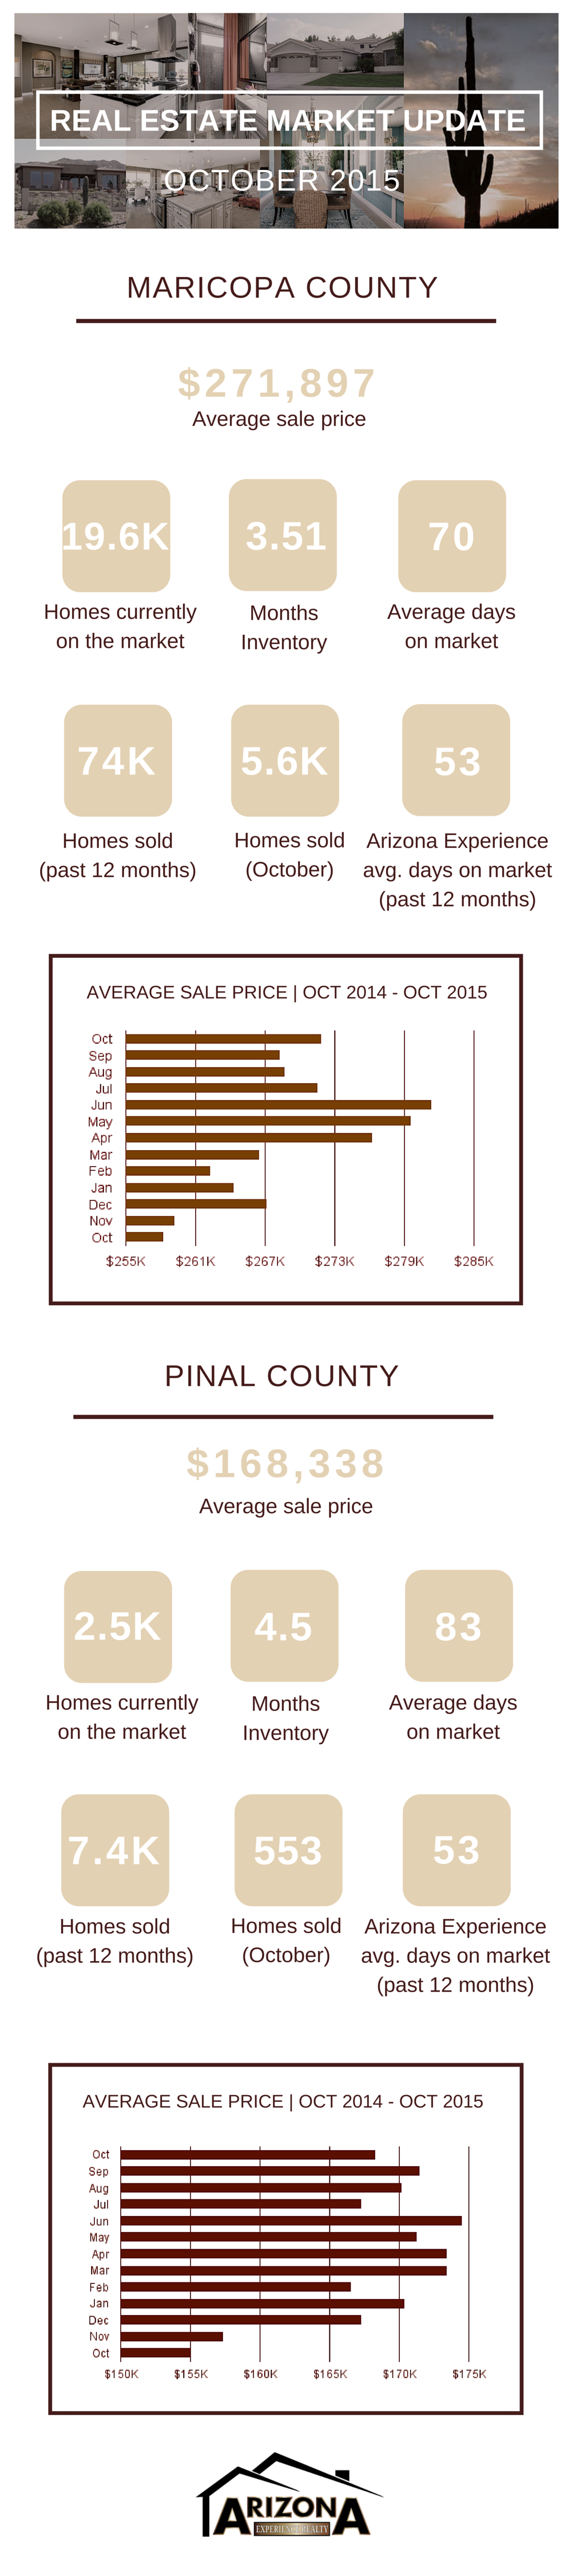 Maricopa + Pinal County Market Update | October 2015 